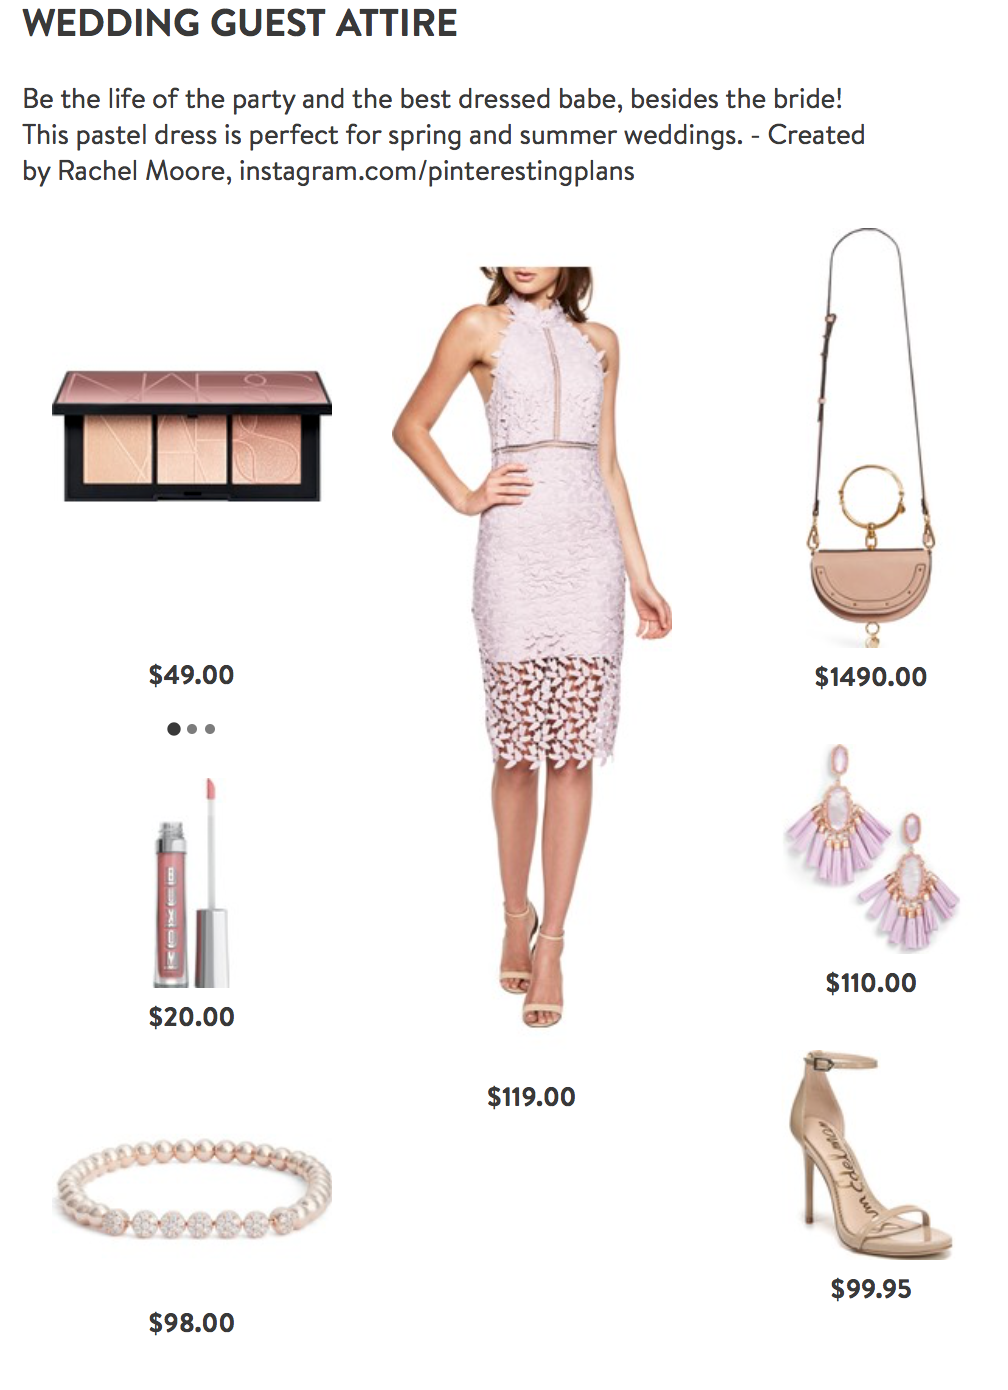 Spring Wedding Guest Dress Outfit from Nordstrom on Pinteresting Plans Fashion Blog